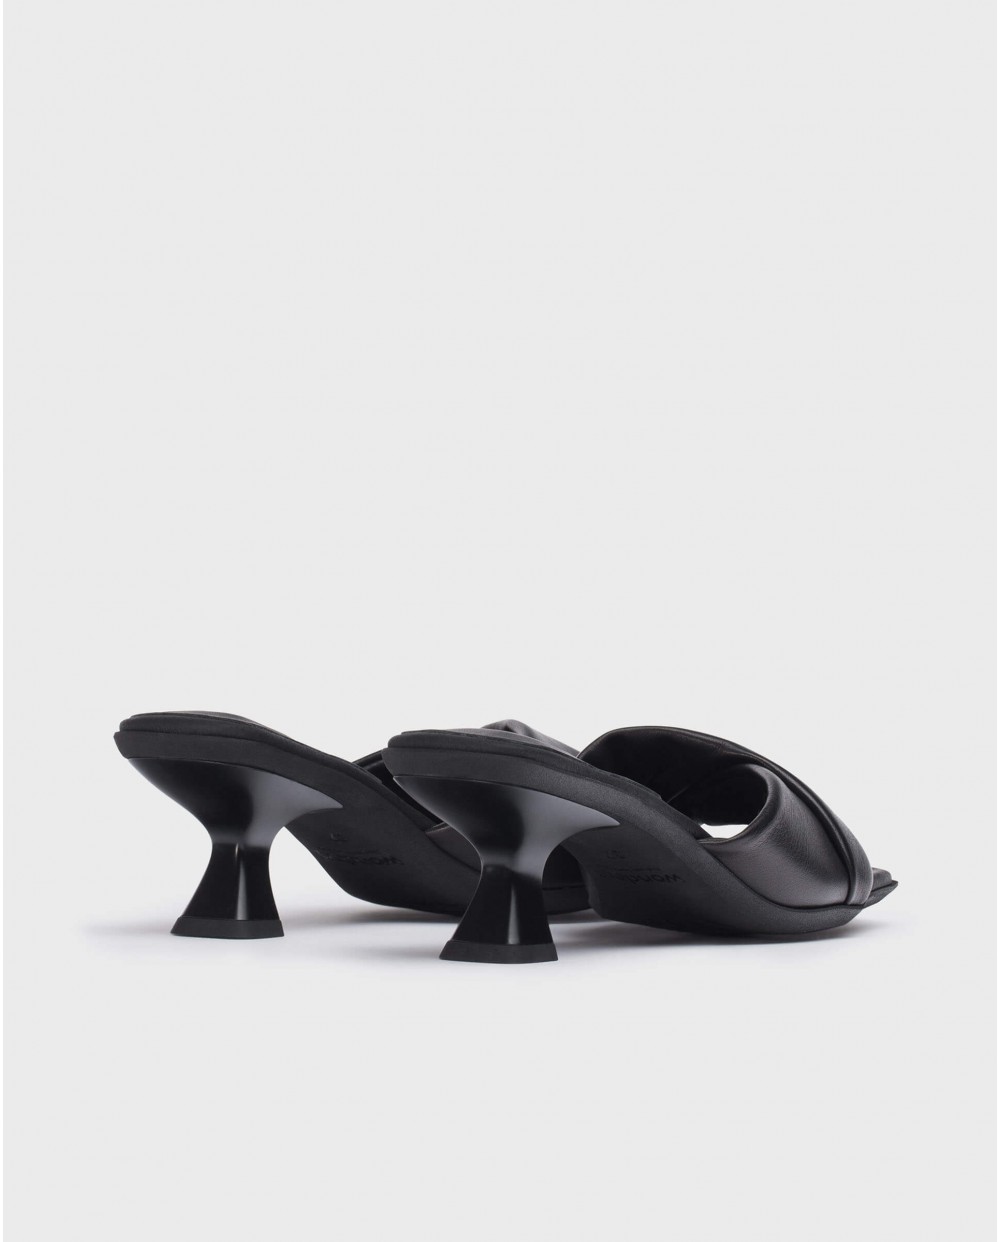 Wonders-Outlet-Mules GLOW Negro